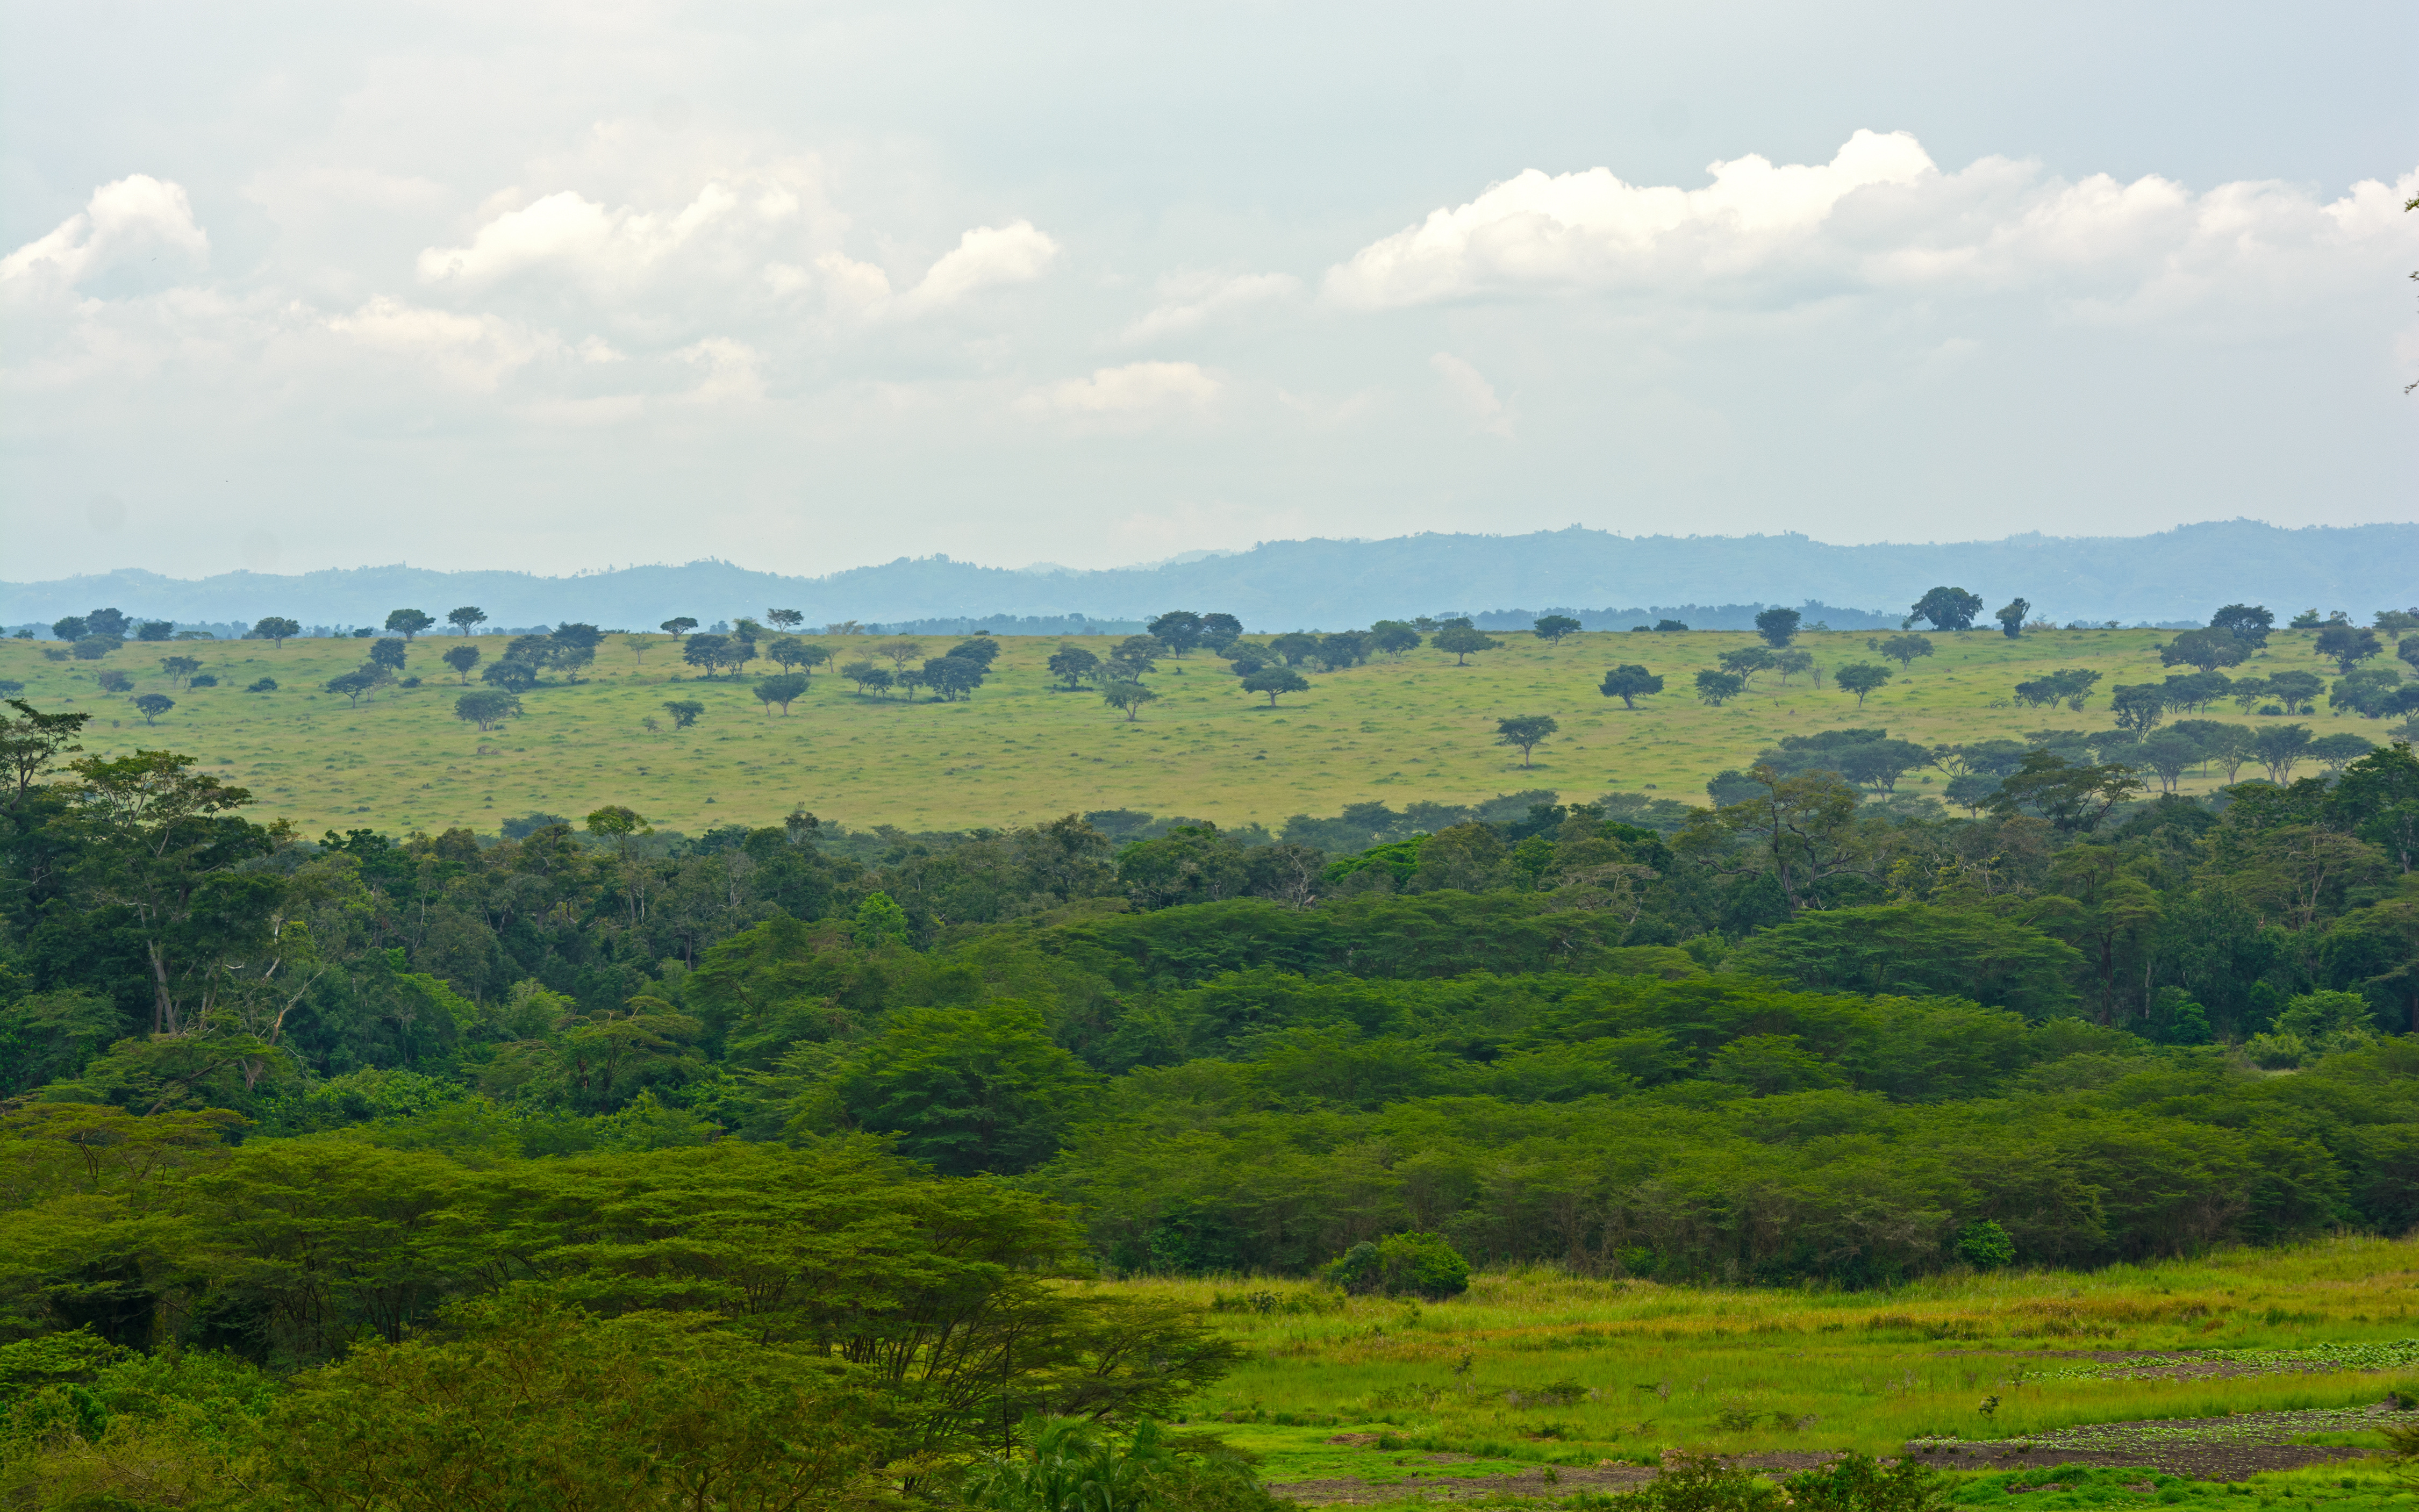 Forest and Savanna in Africa in the Ishasha Region of Queen Elizabeth National Park